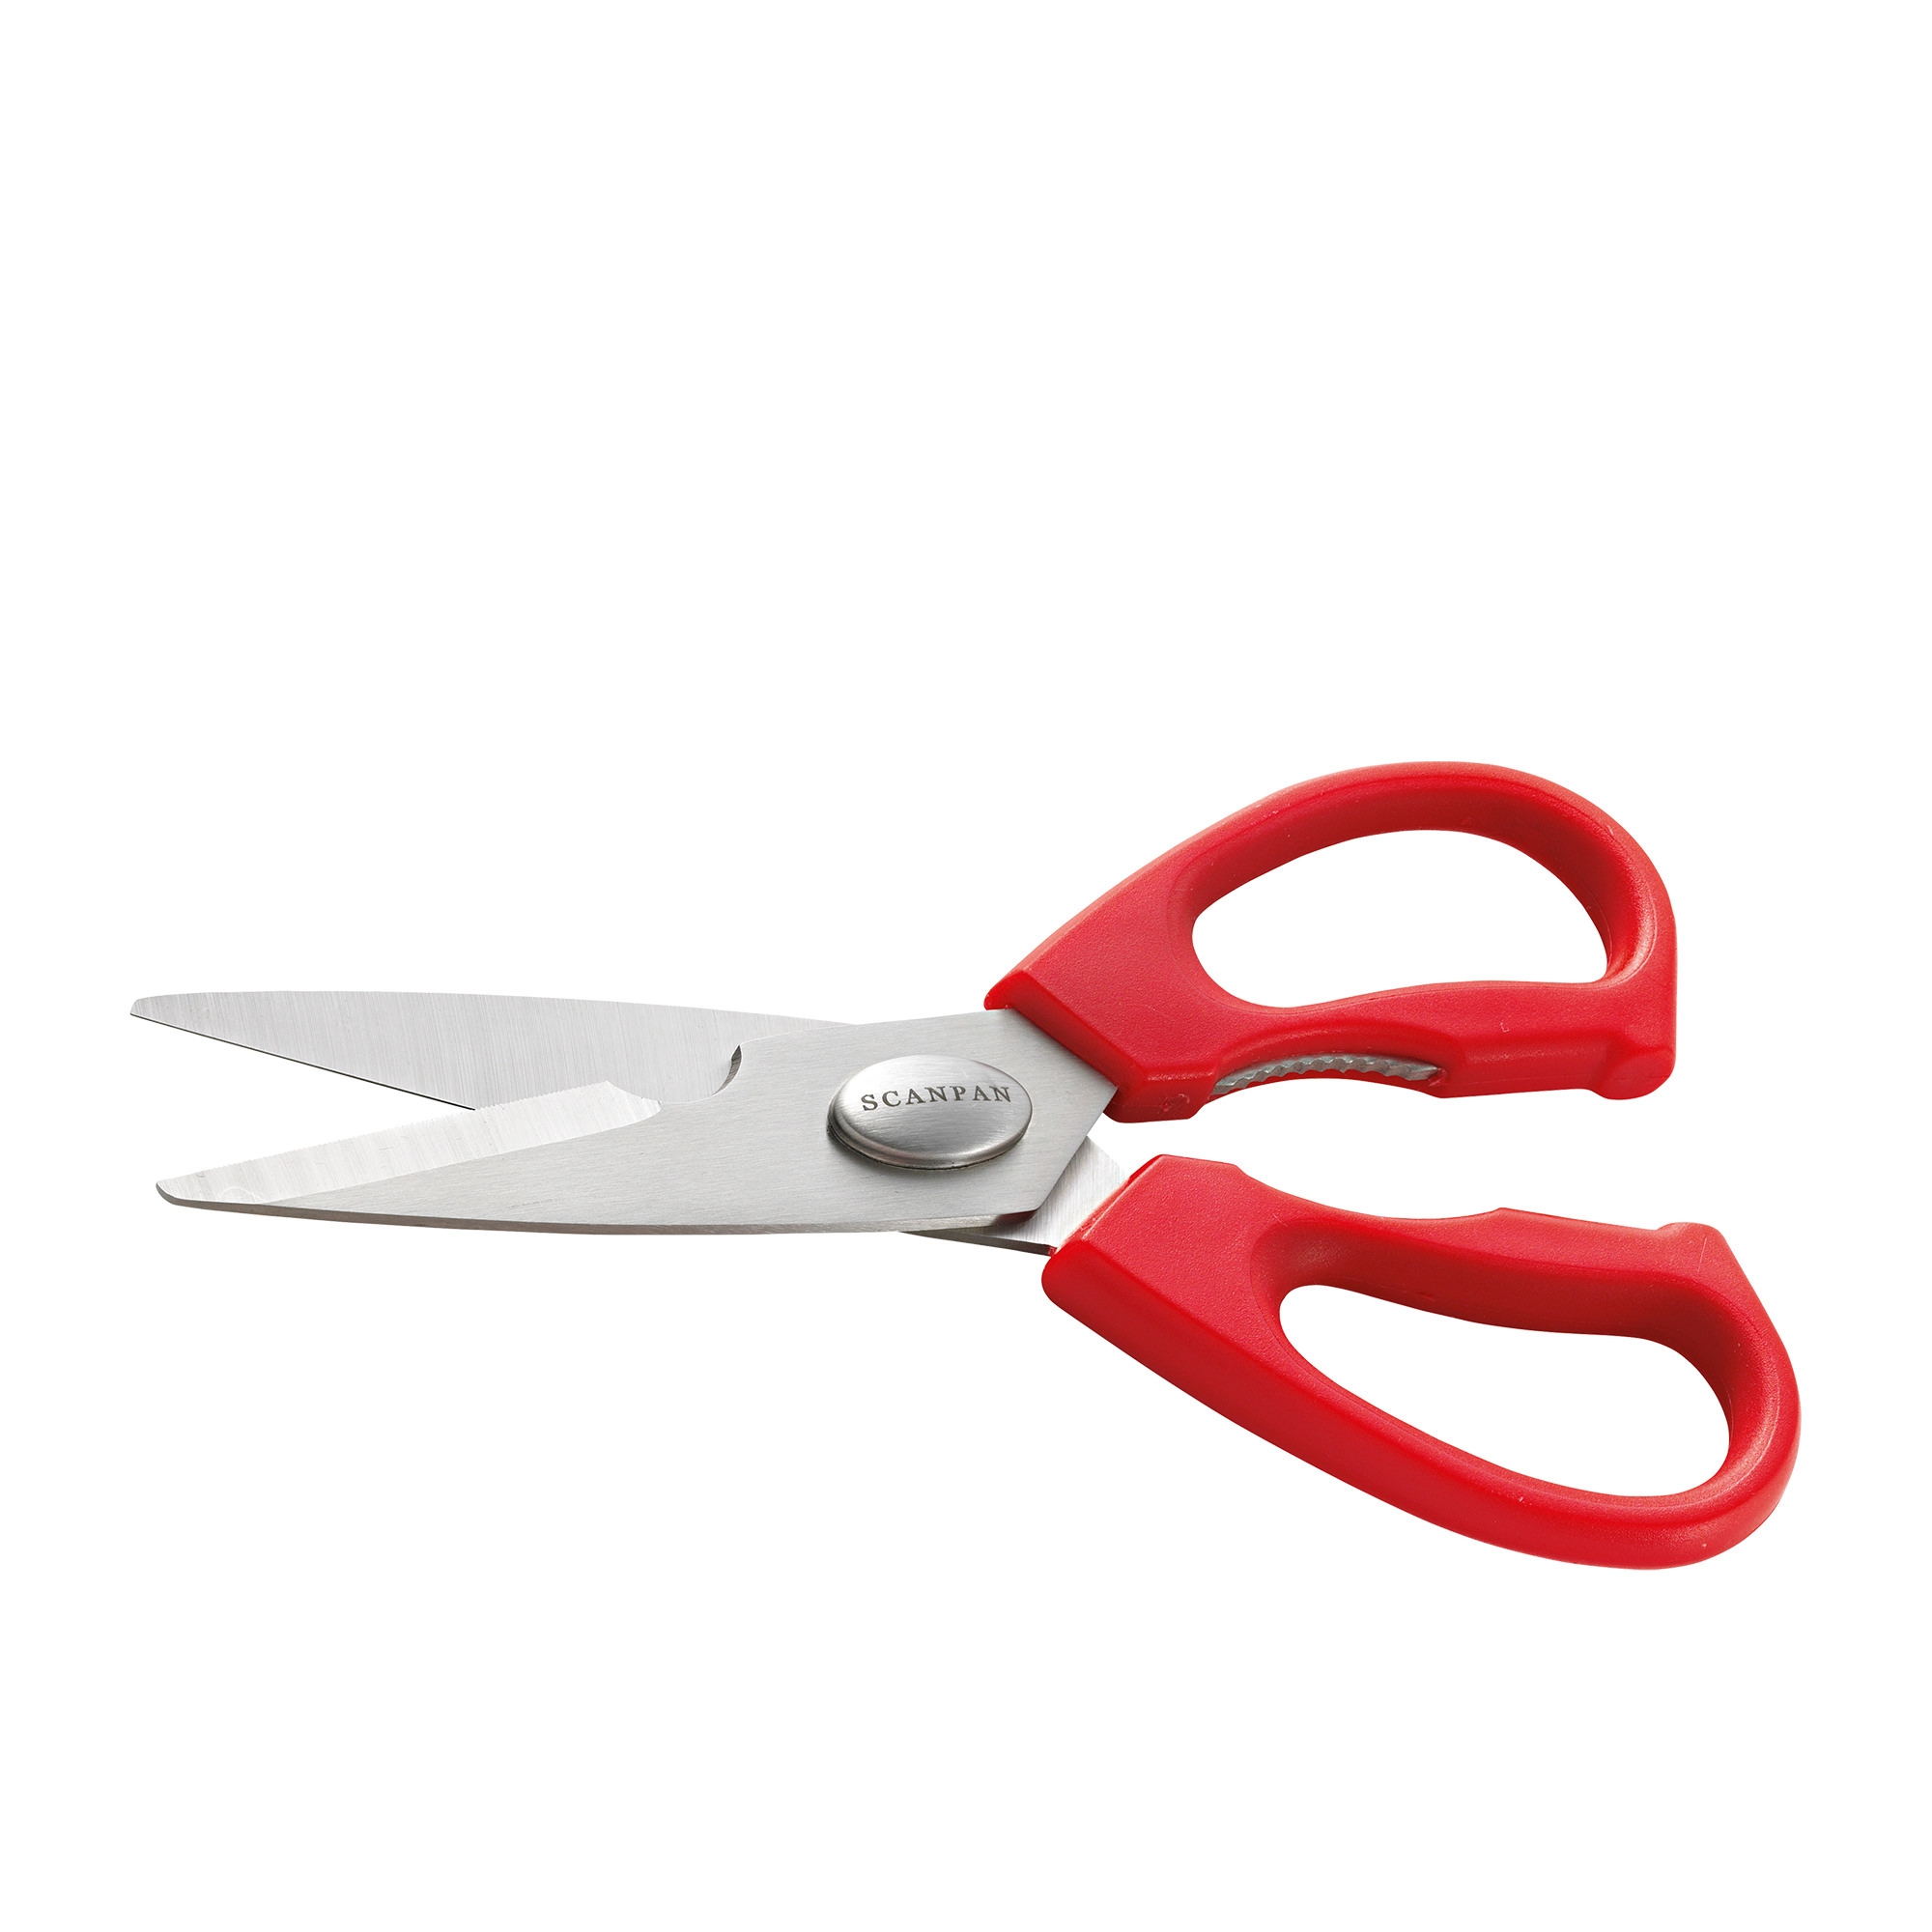 Scanpan Spectrum Soft Touch Kitchen Shears Red Image 2